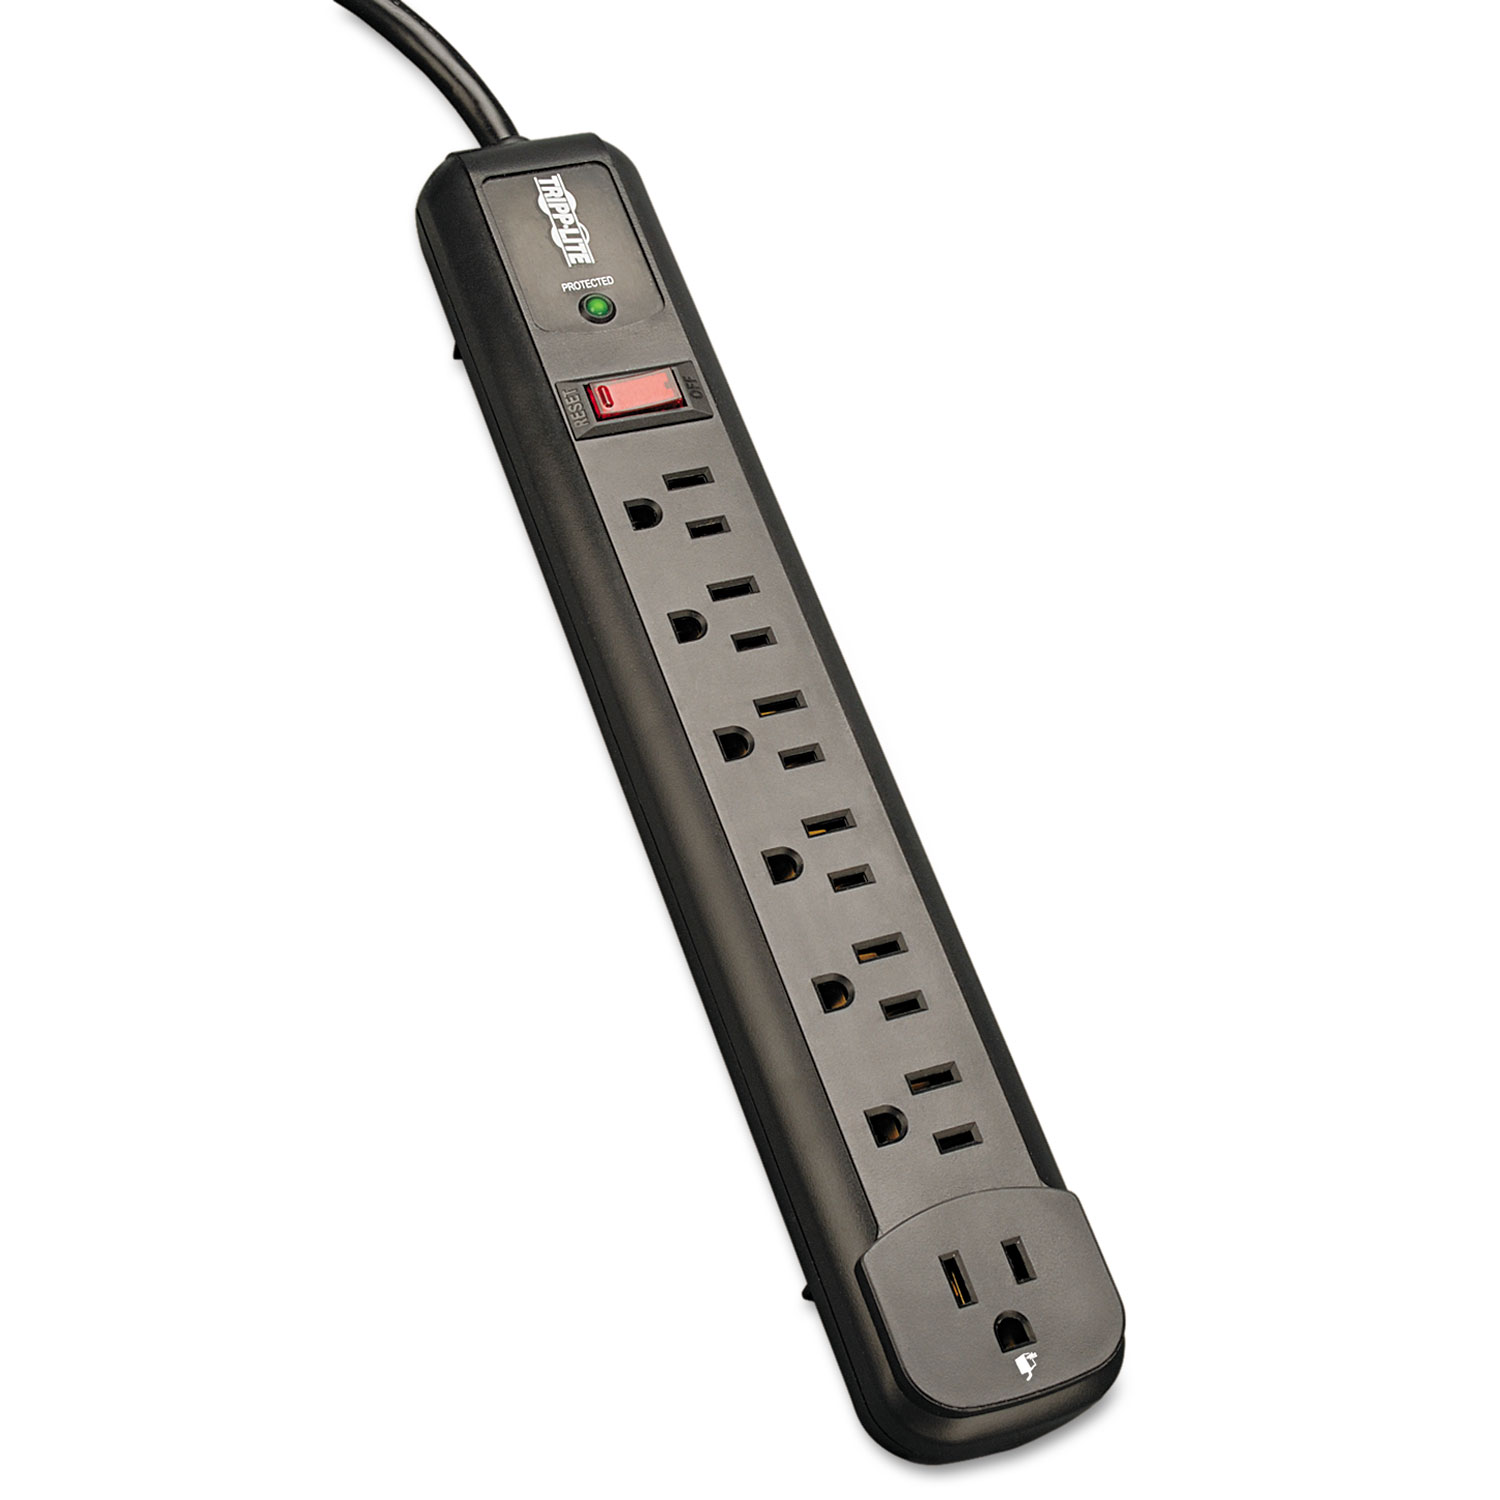  Tripp Lite TLP74RB Protect It! Surge Protector, 7 Outlets, 4 ft. Cord, 1080 Joules, Black (TRPTLP74RB) 